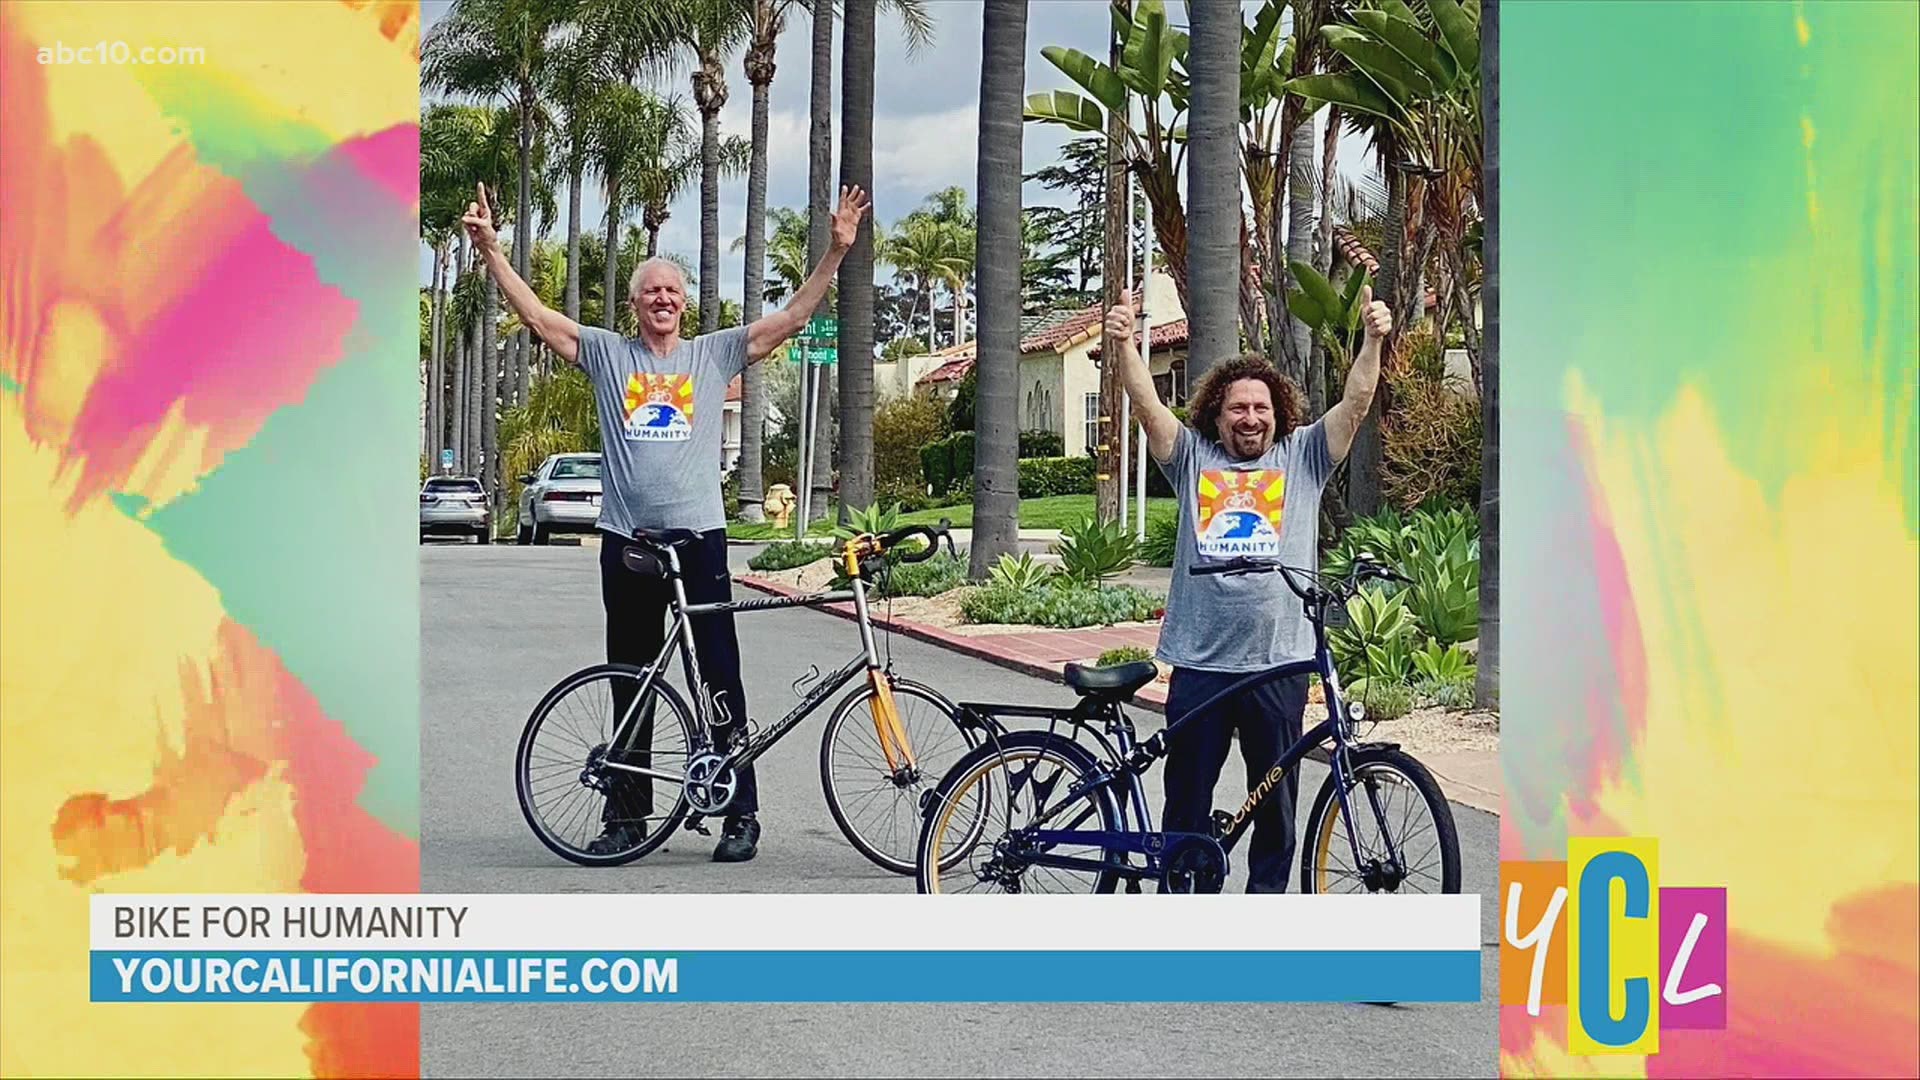 Bike for Humanity was founded by Tony Zinn and Bill Walton and they're hosting a special Halloween ride benefitting the California Fire Foundation.